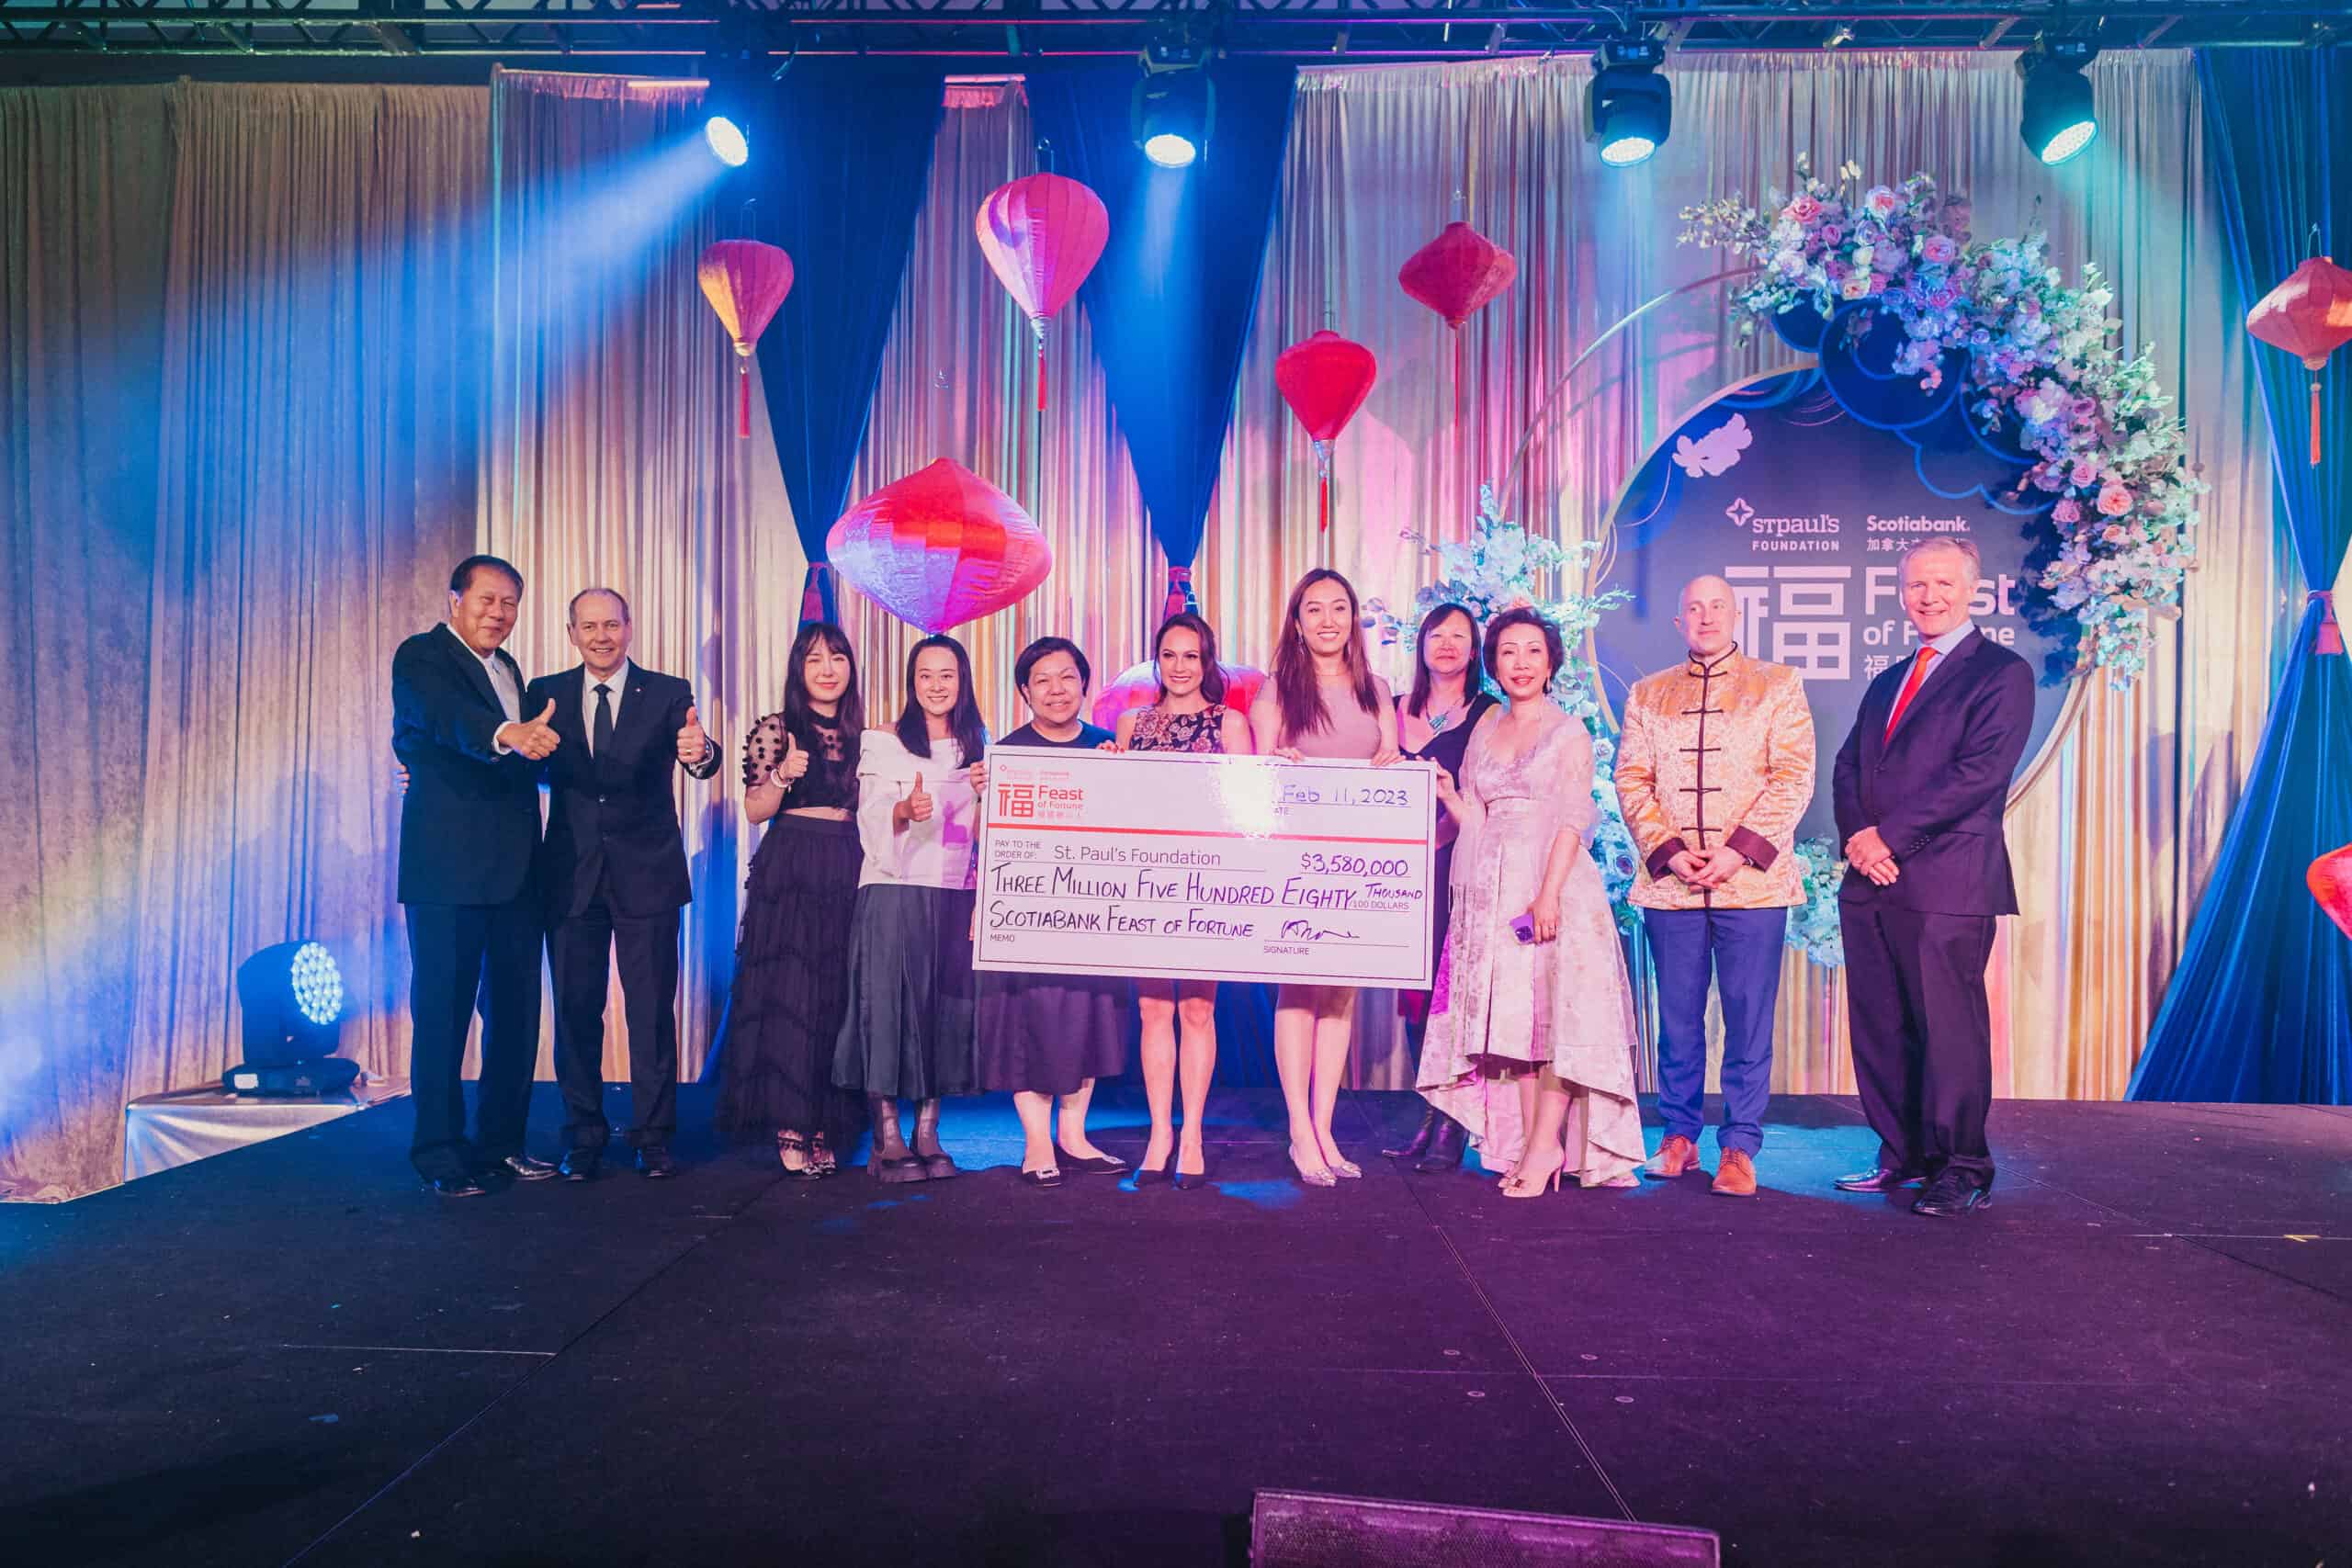 Photo shows people on stage at the Feast of Fortune gala, holding a large cheque